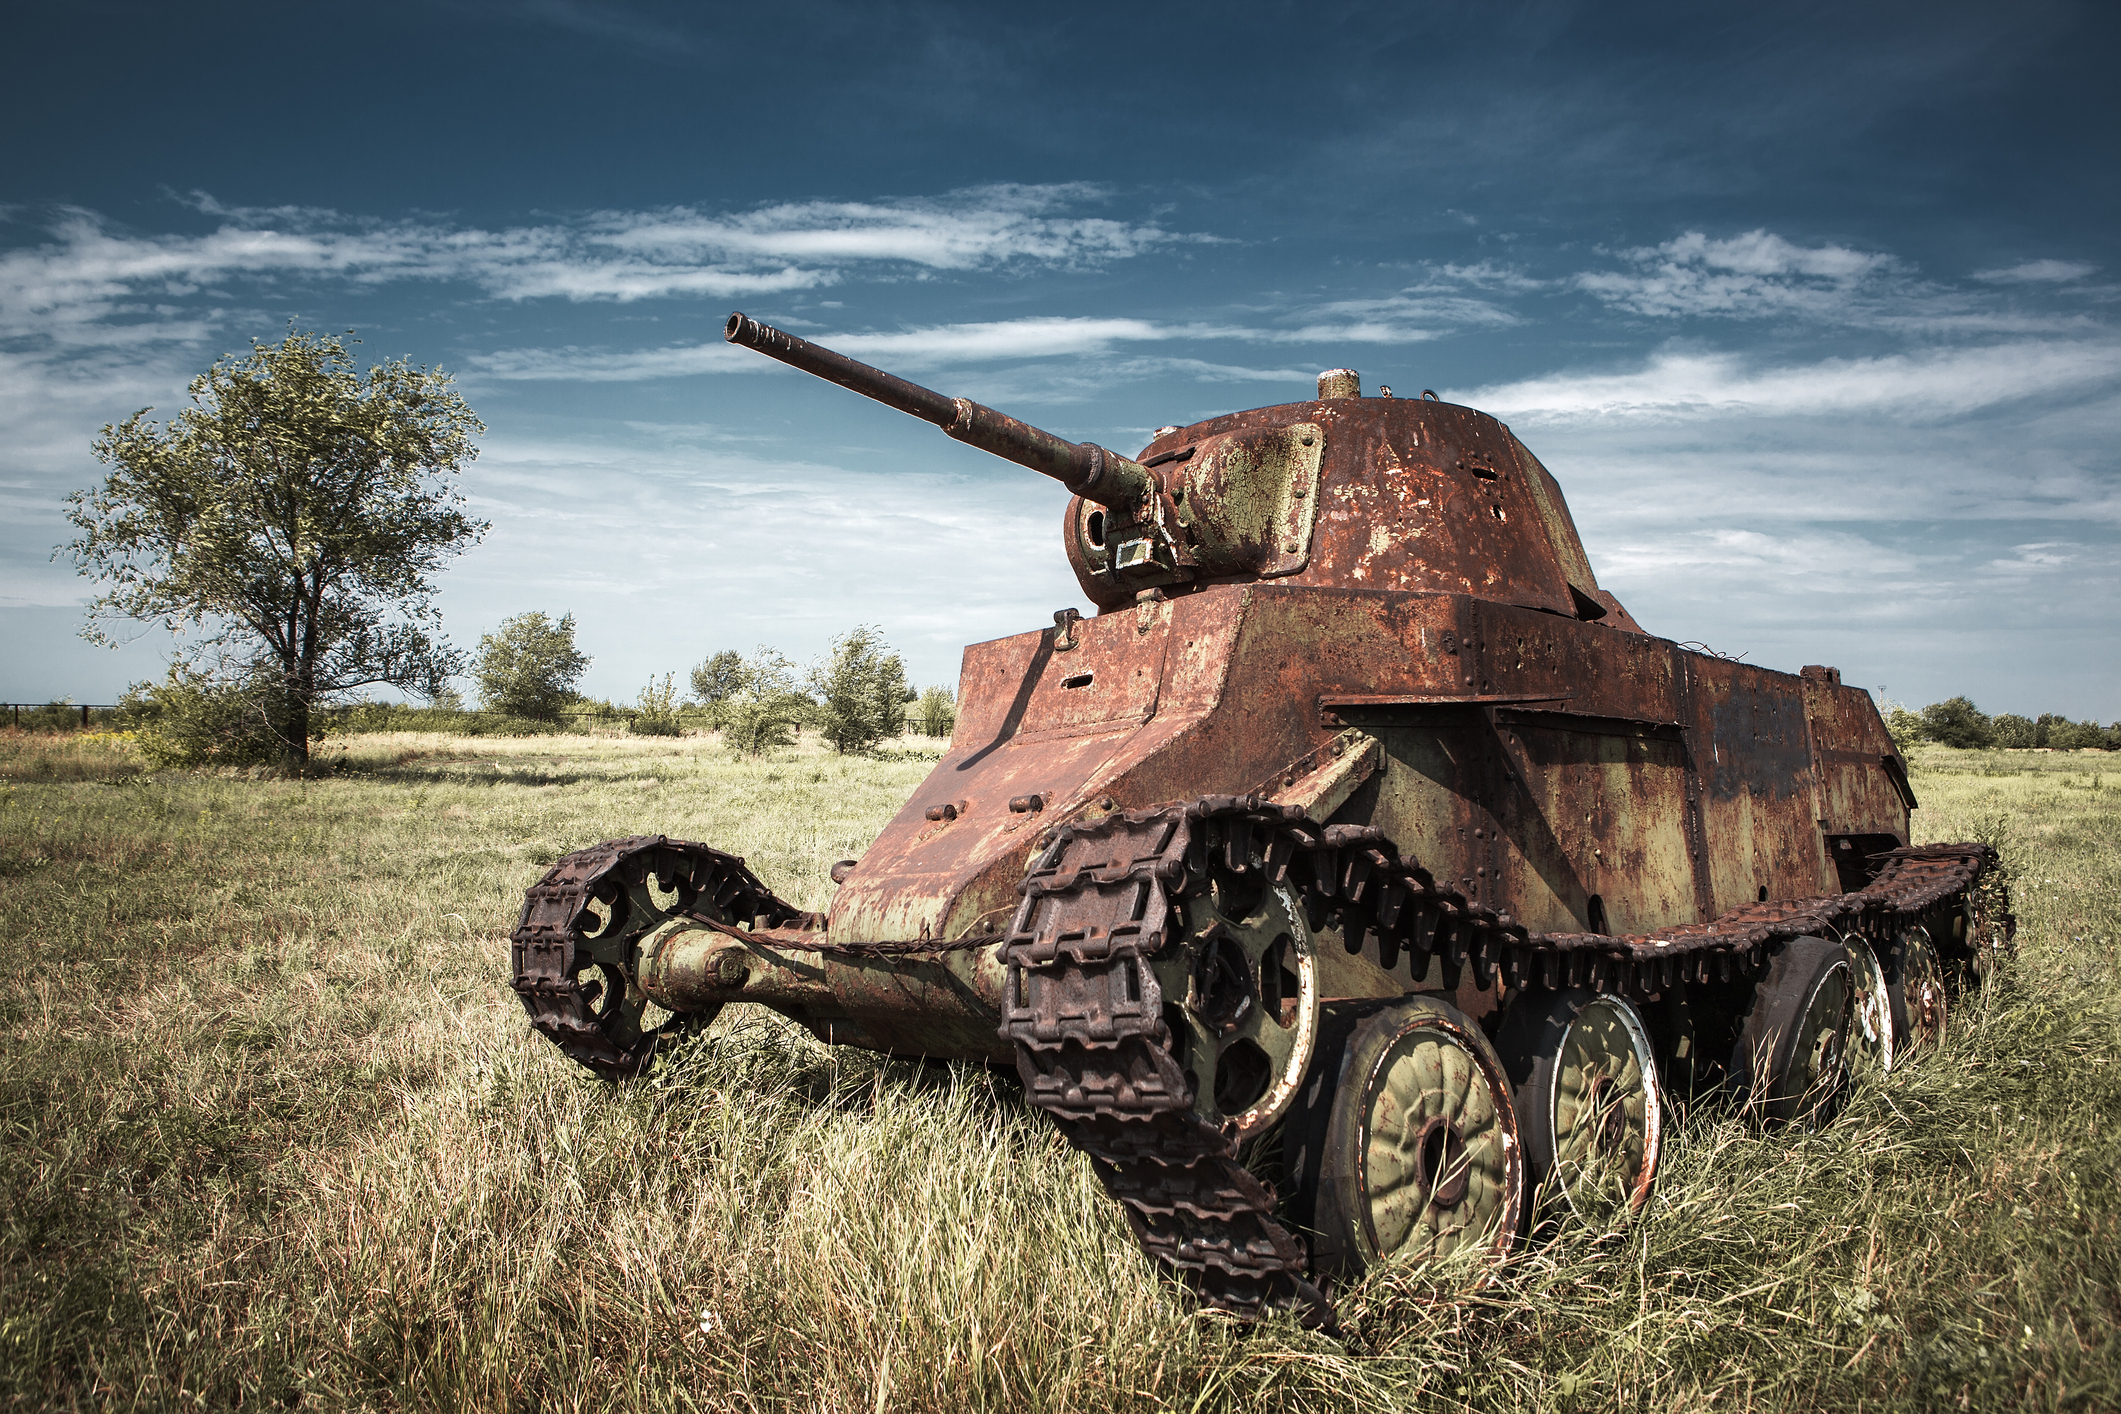 A rusty tank from the Last War sits abandoned in a field.